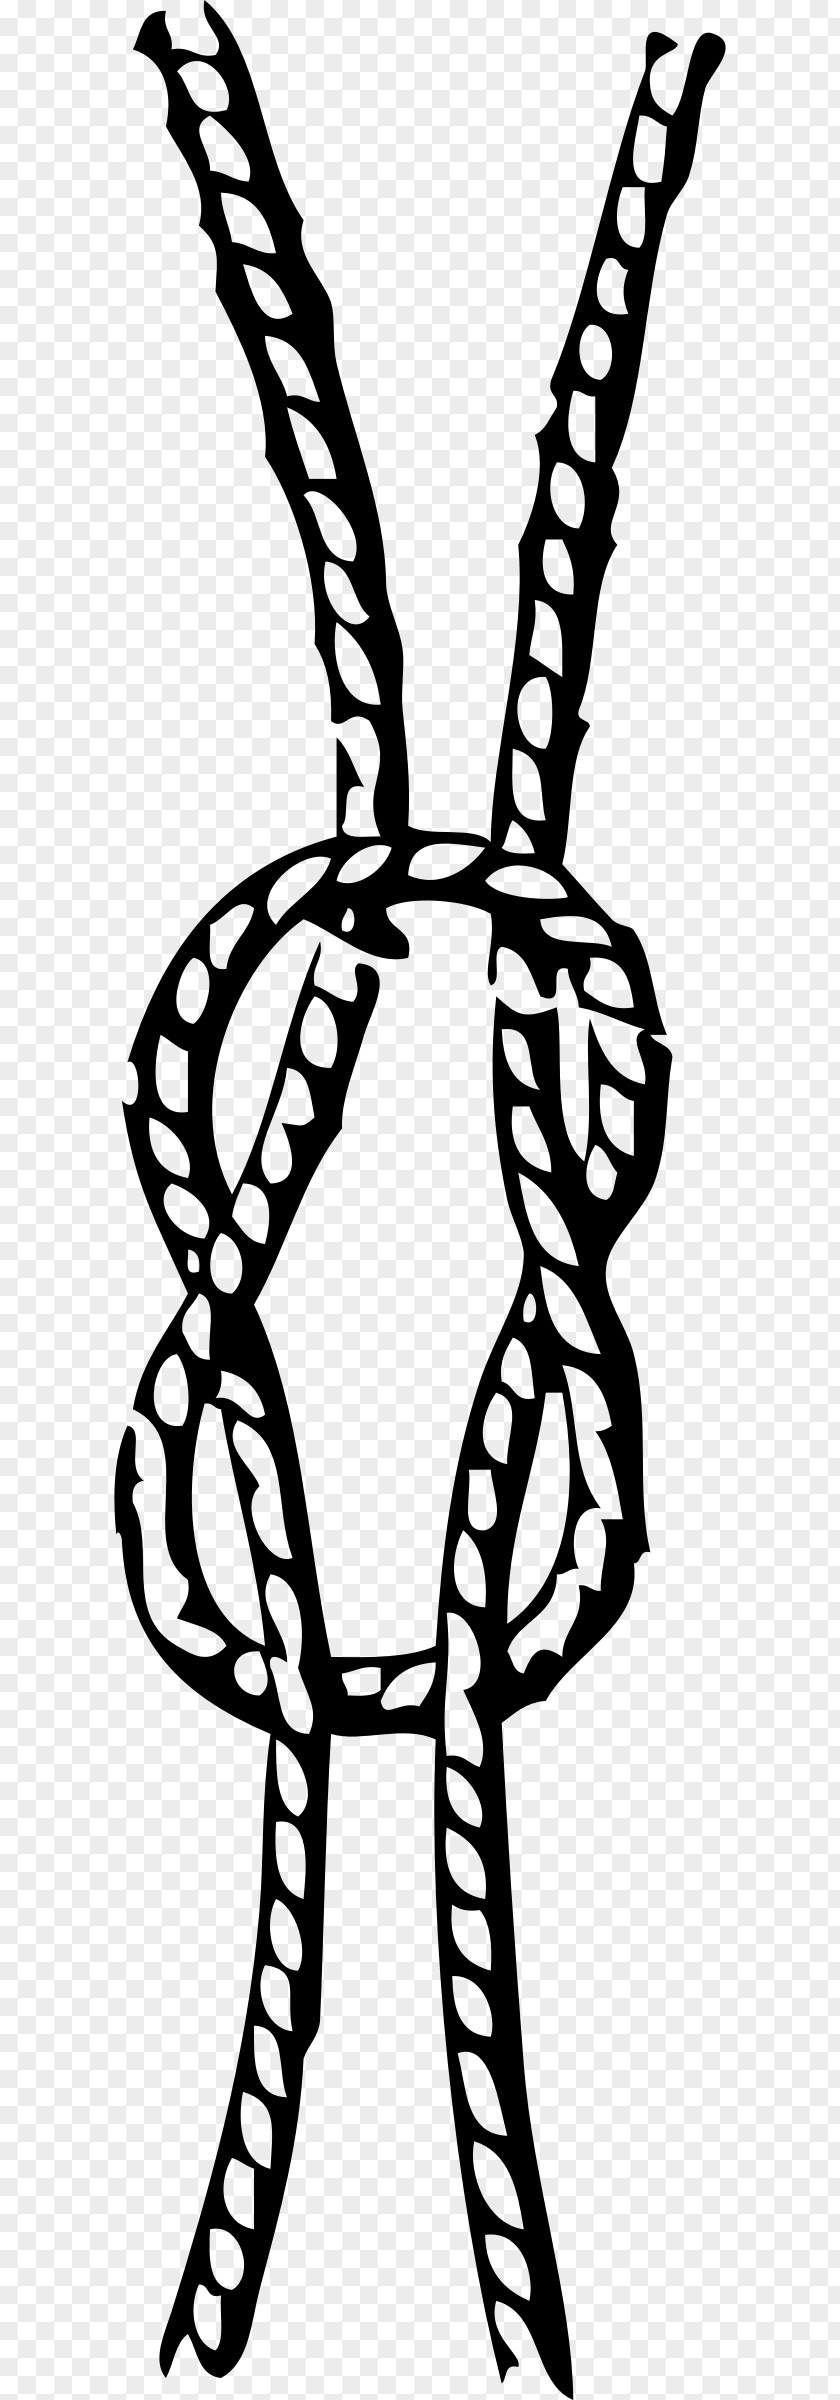 Rope Knot Reef Maritime Transport Clip Art PNG